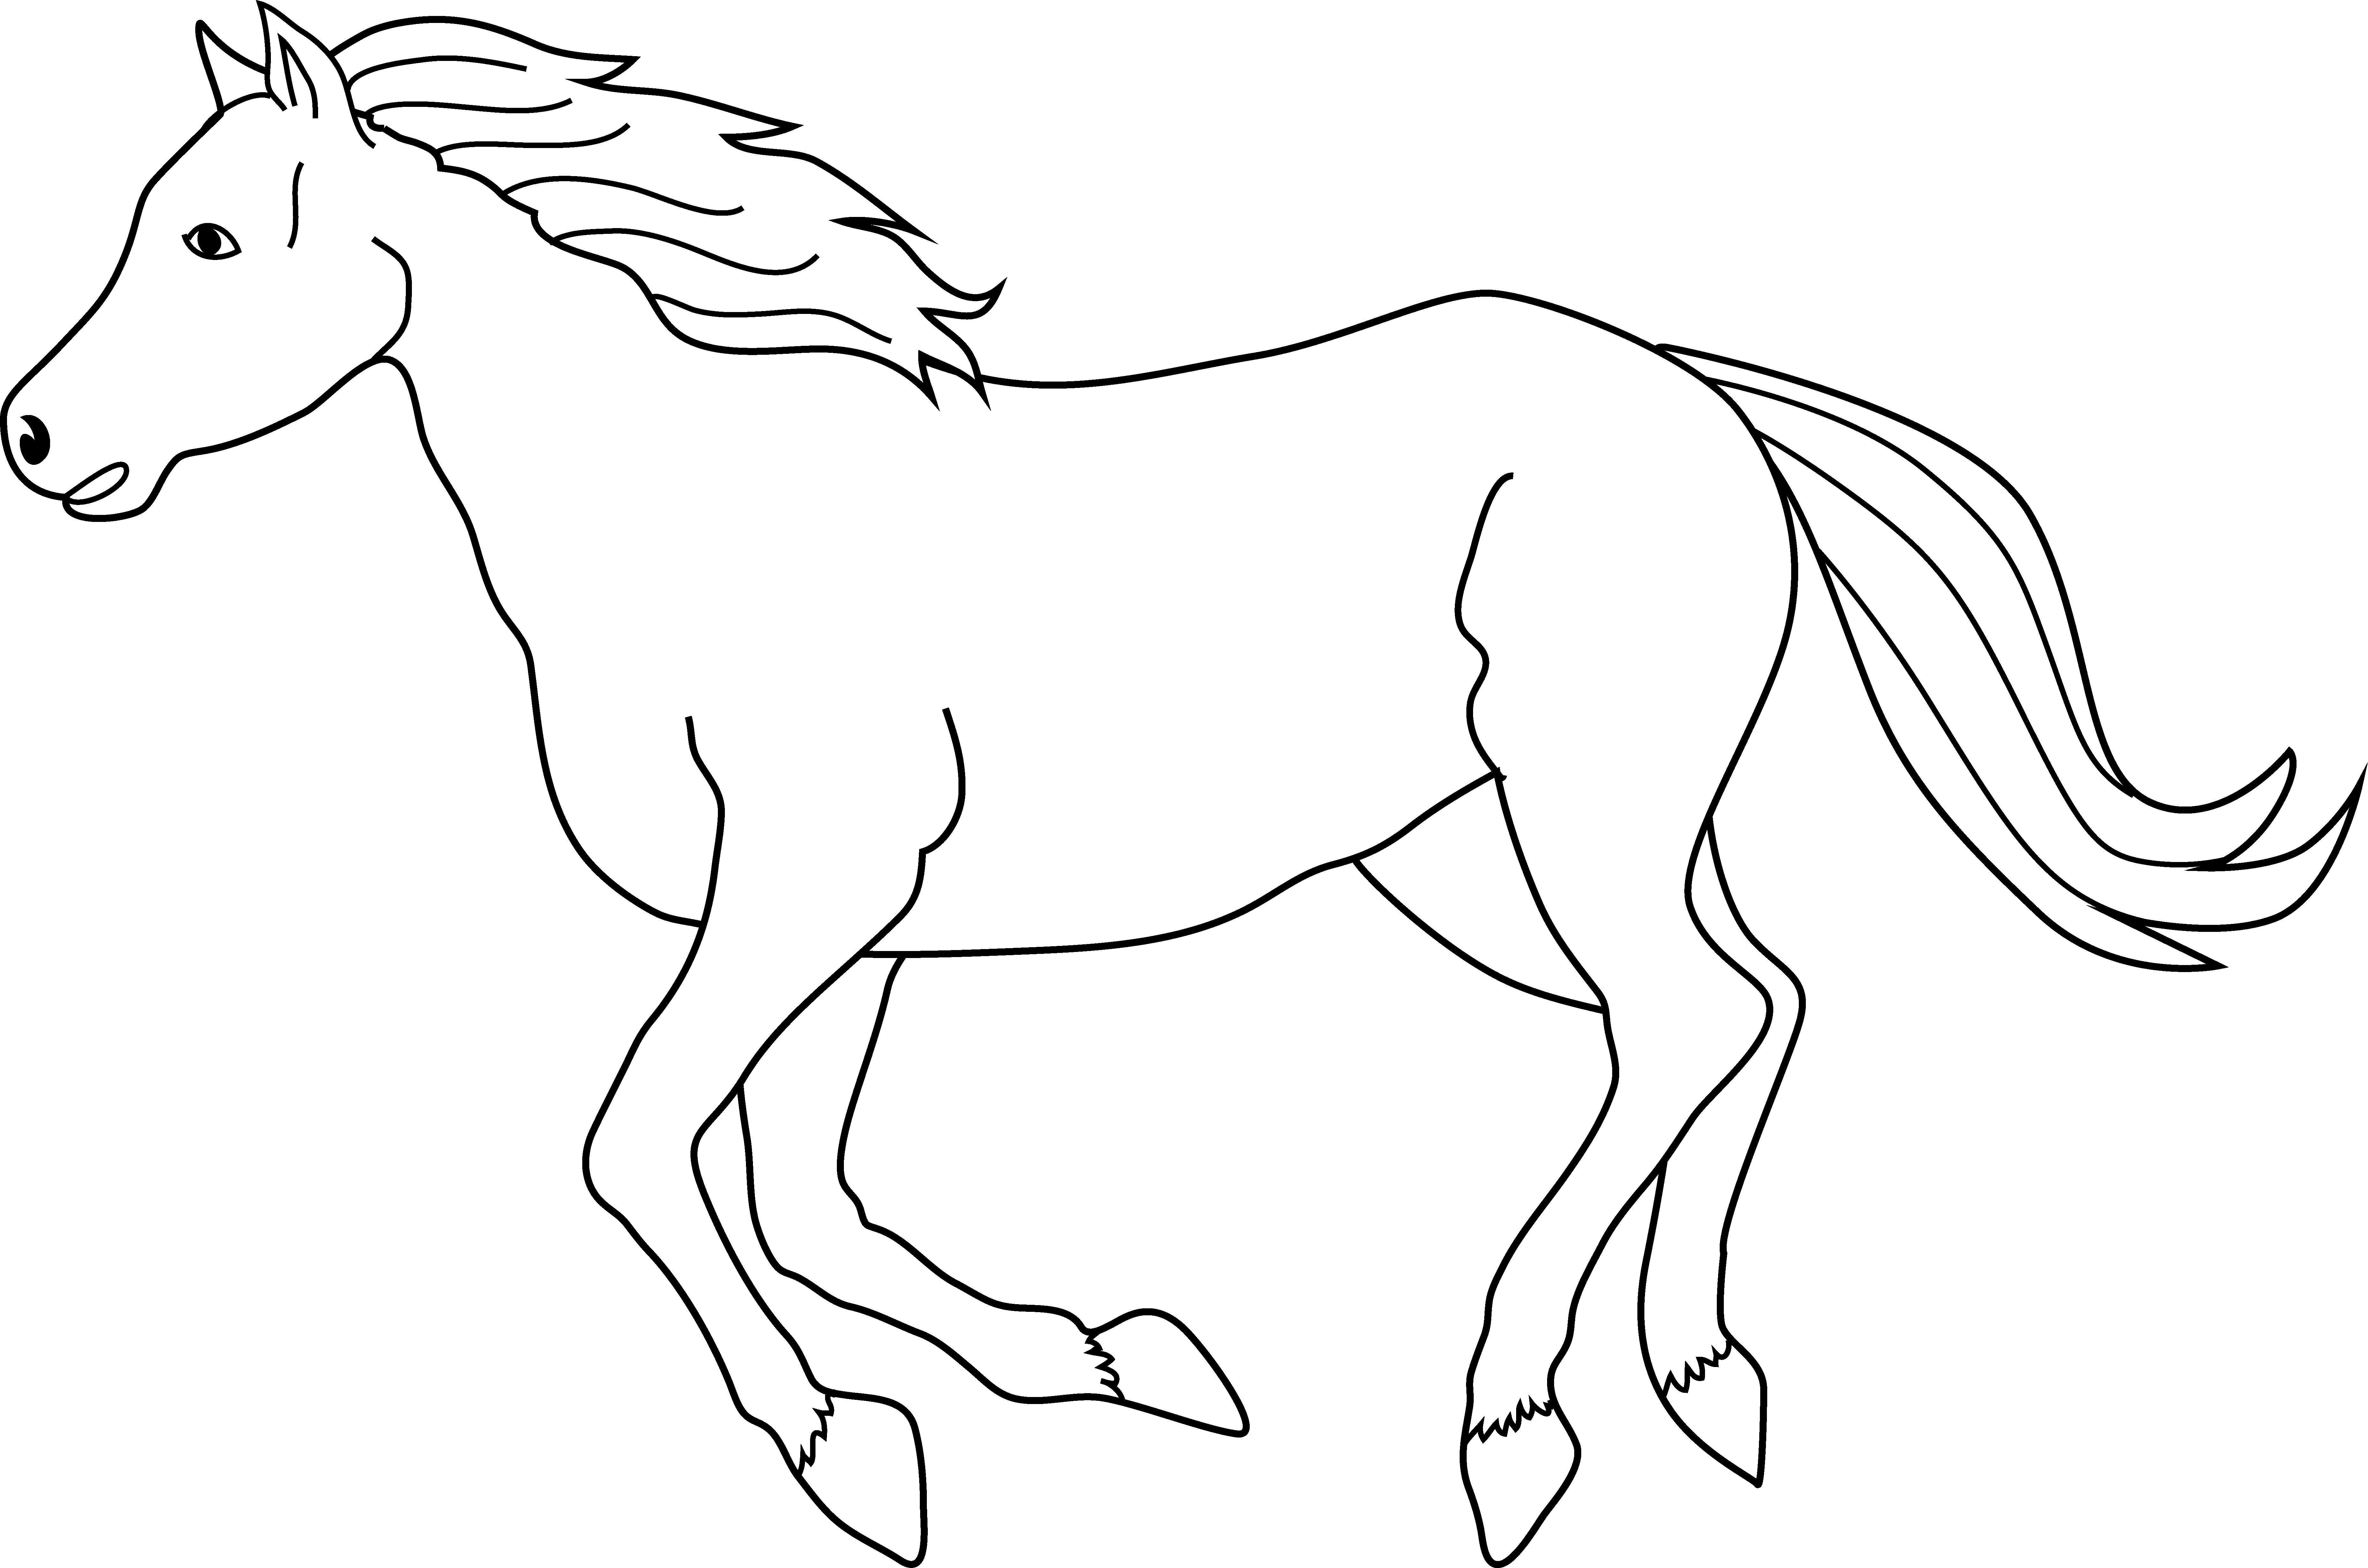 Free Running Horse Images, Download Free Running Horse Images png